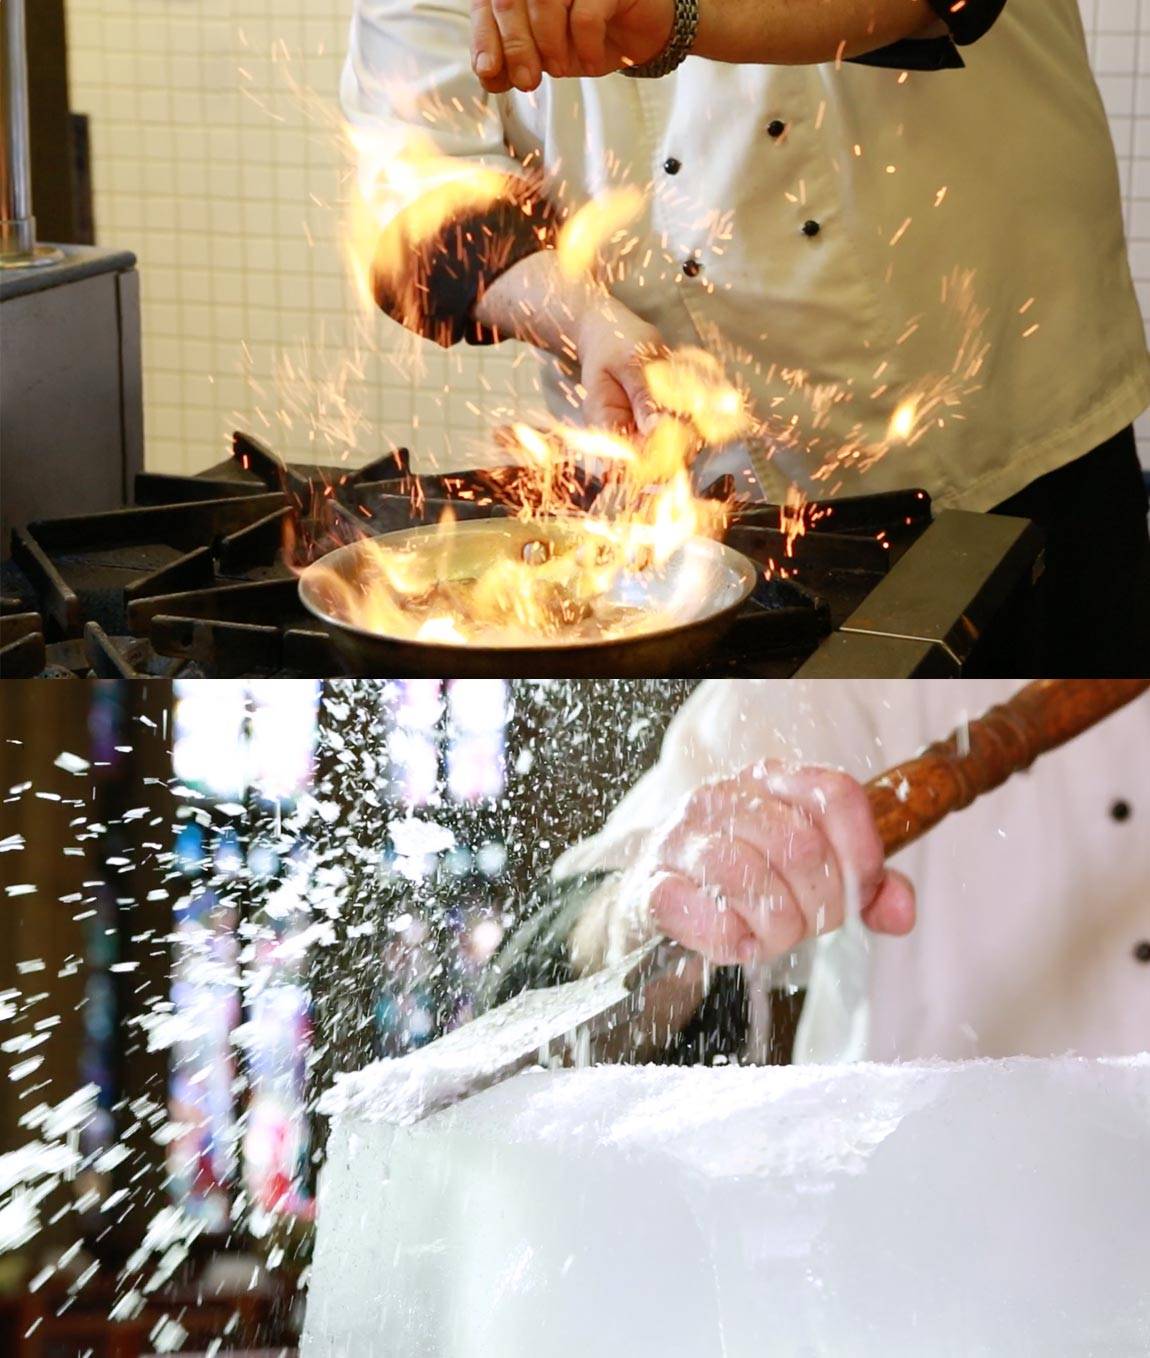 Hot and Cold making Bananas Foster and ice carving